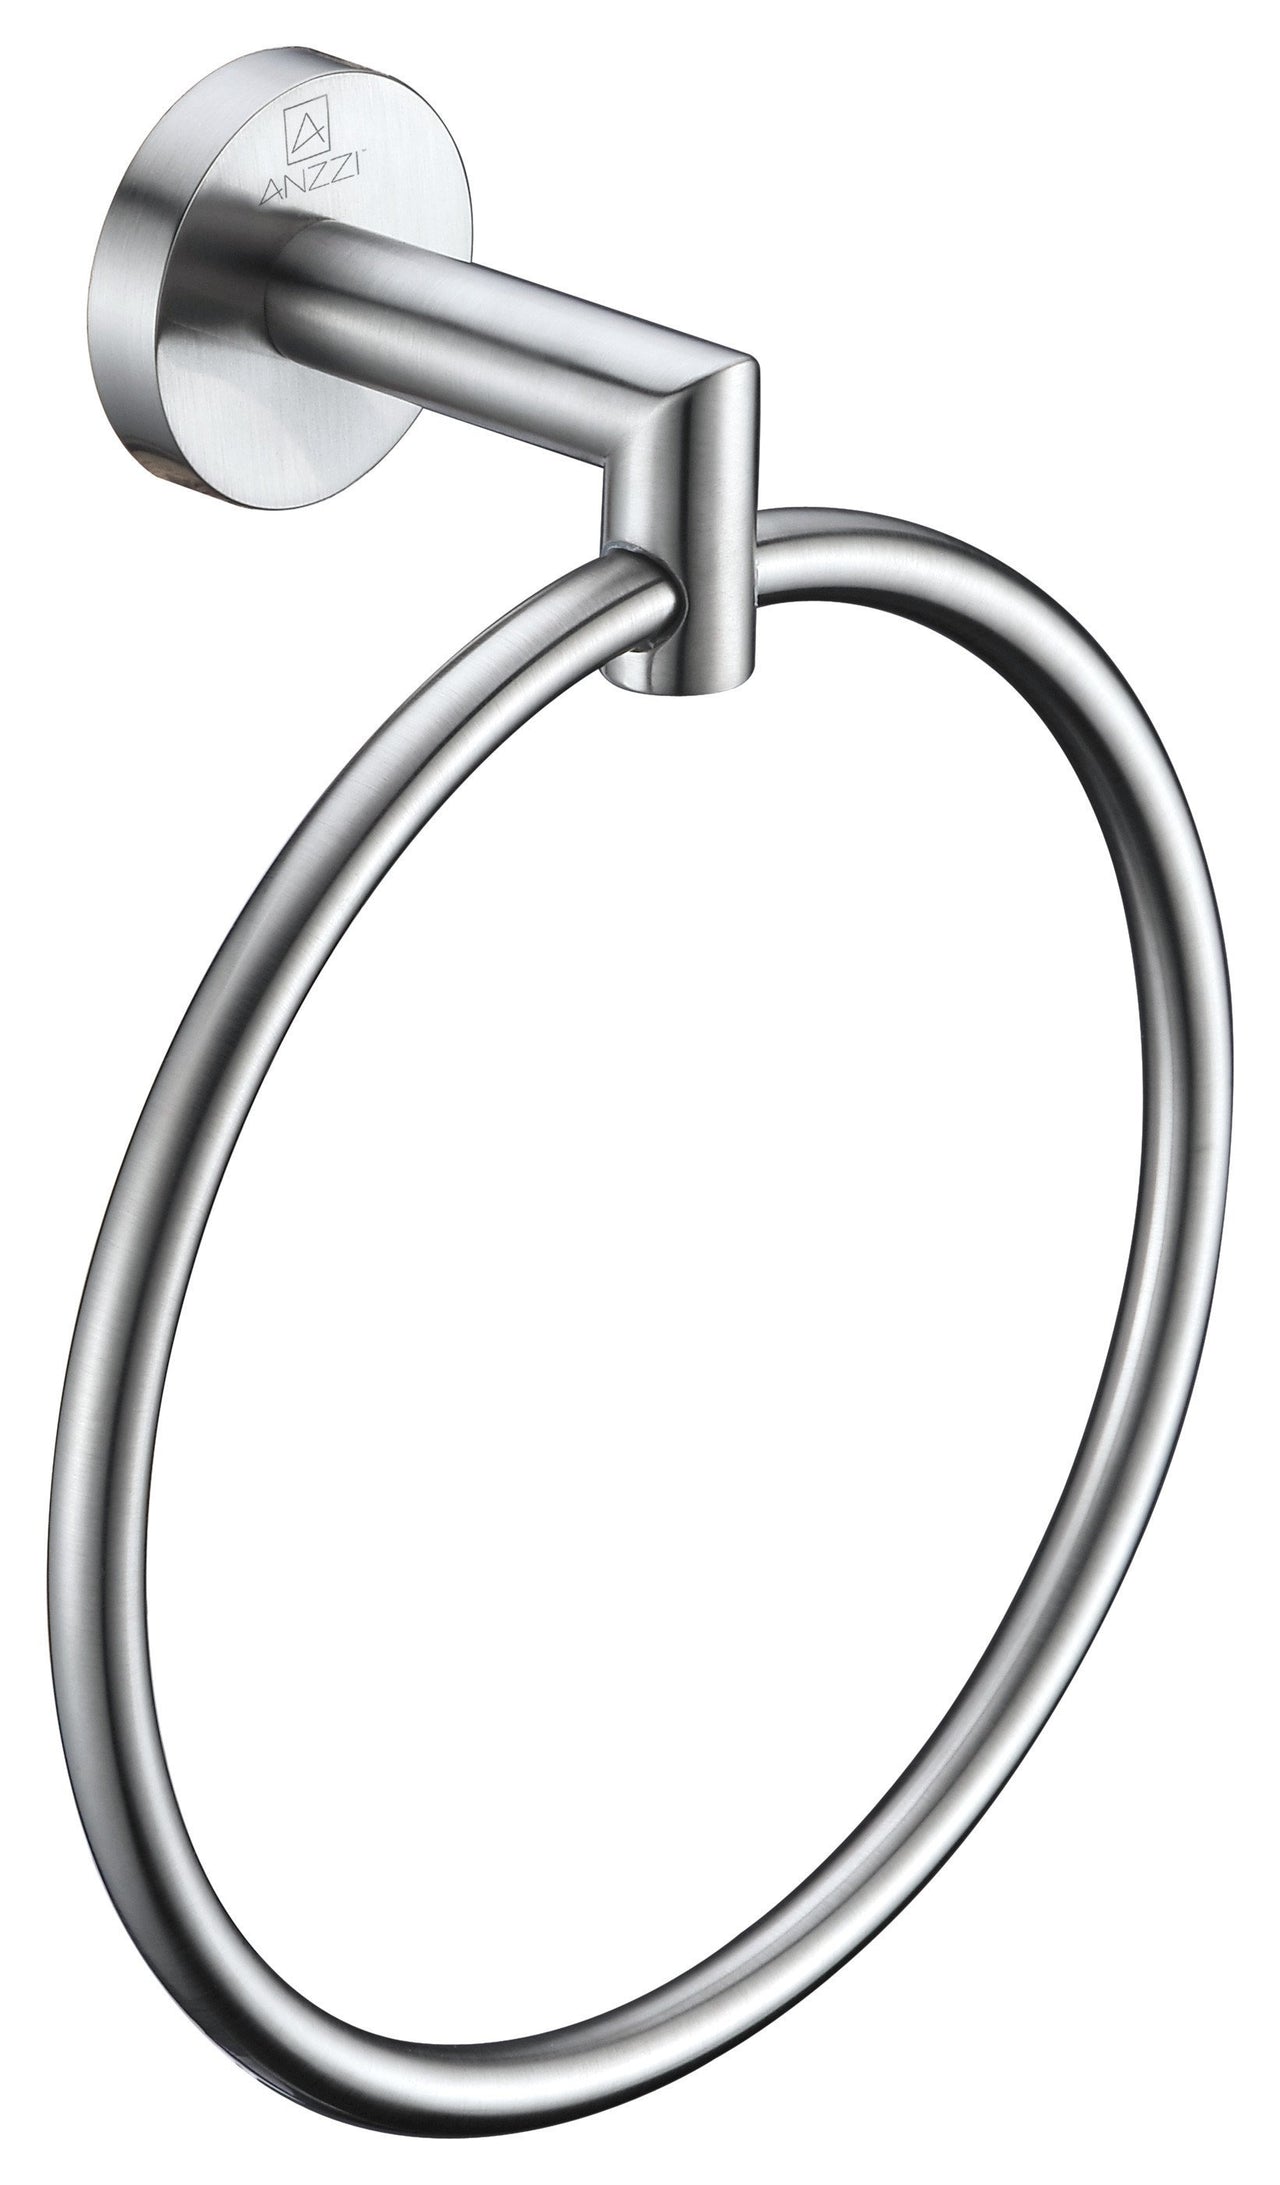 ANZZI Caster 2 Series Towel Ring in Brushed Nickel Towel Ring ANZZI 